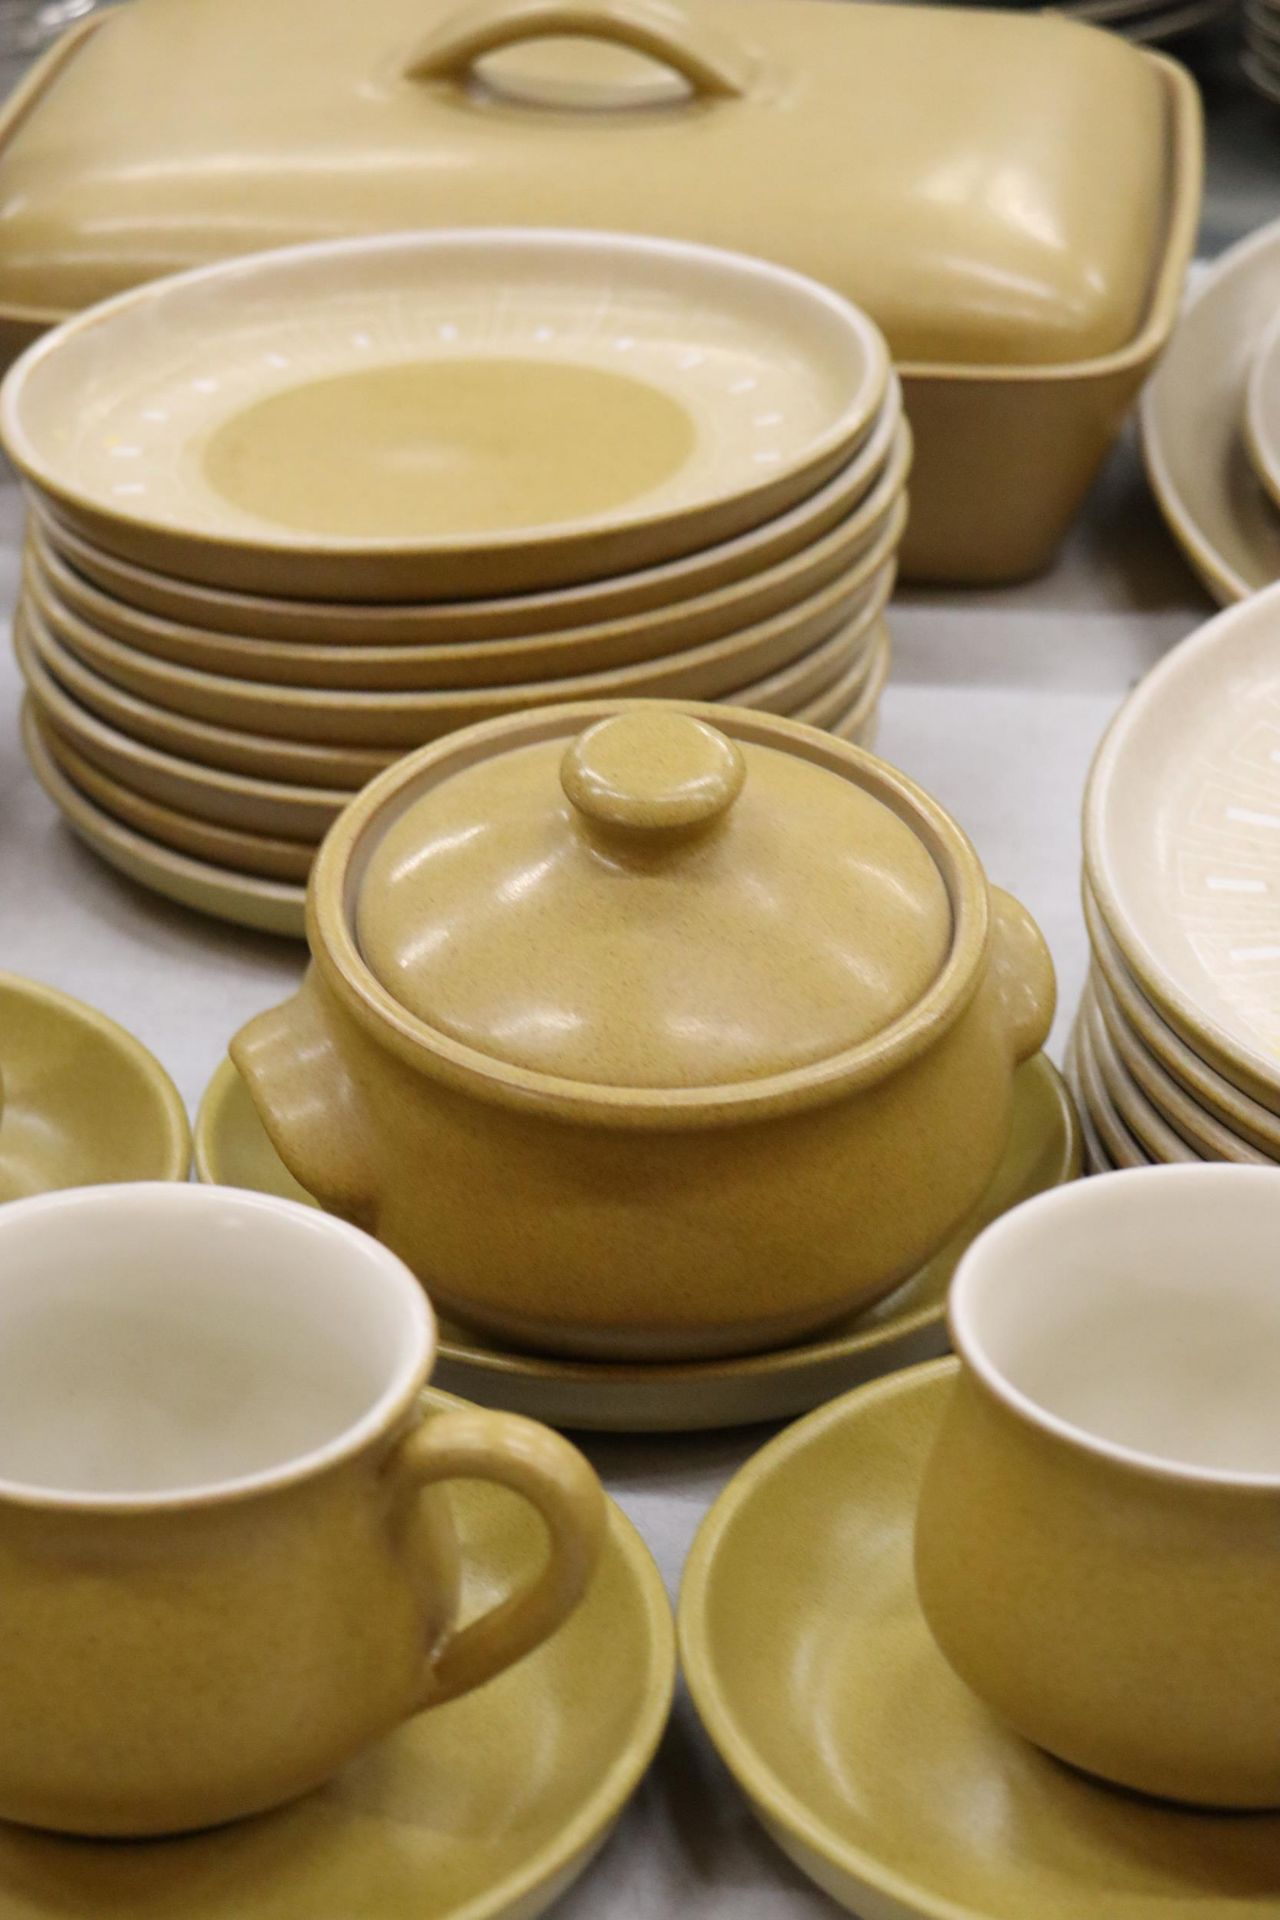 A DENBY MUSTARD COLOURED DINNER SERVICE, TO INCLUDE VARIOUS SIZES OF PLATES, A CASSEROLE DISH, - Image 4 of 9